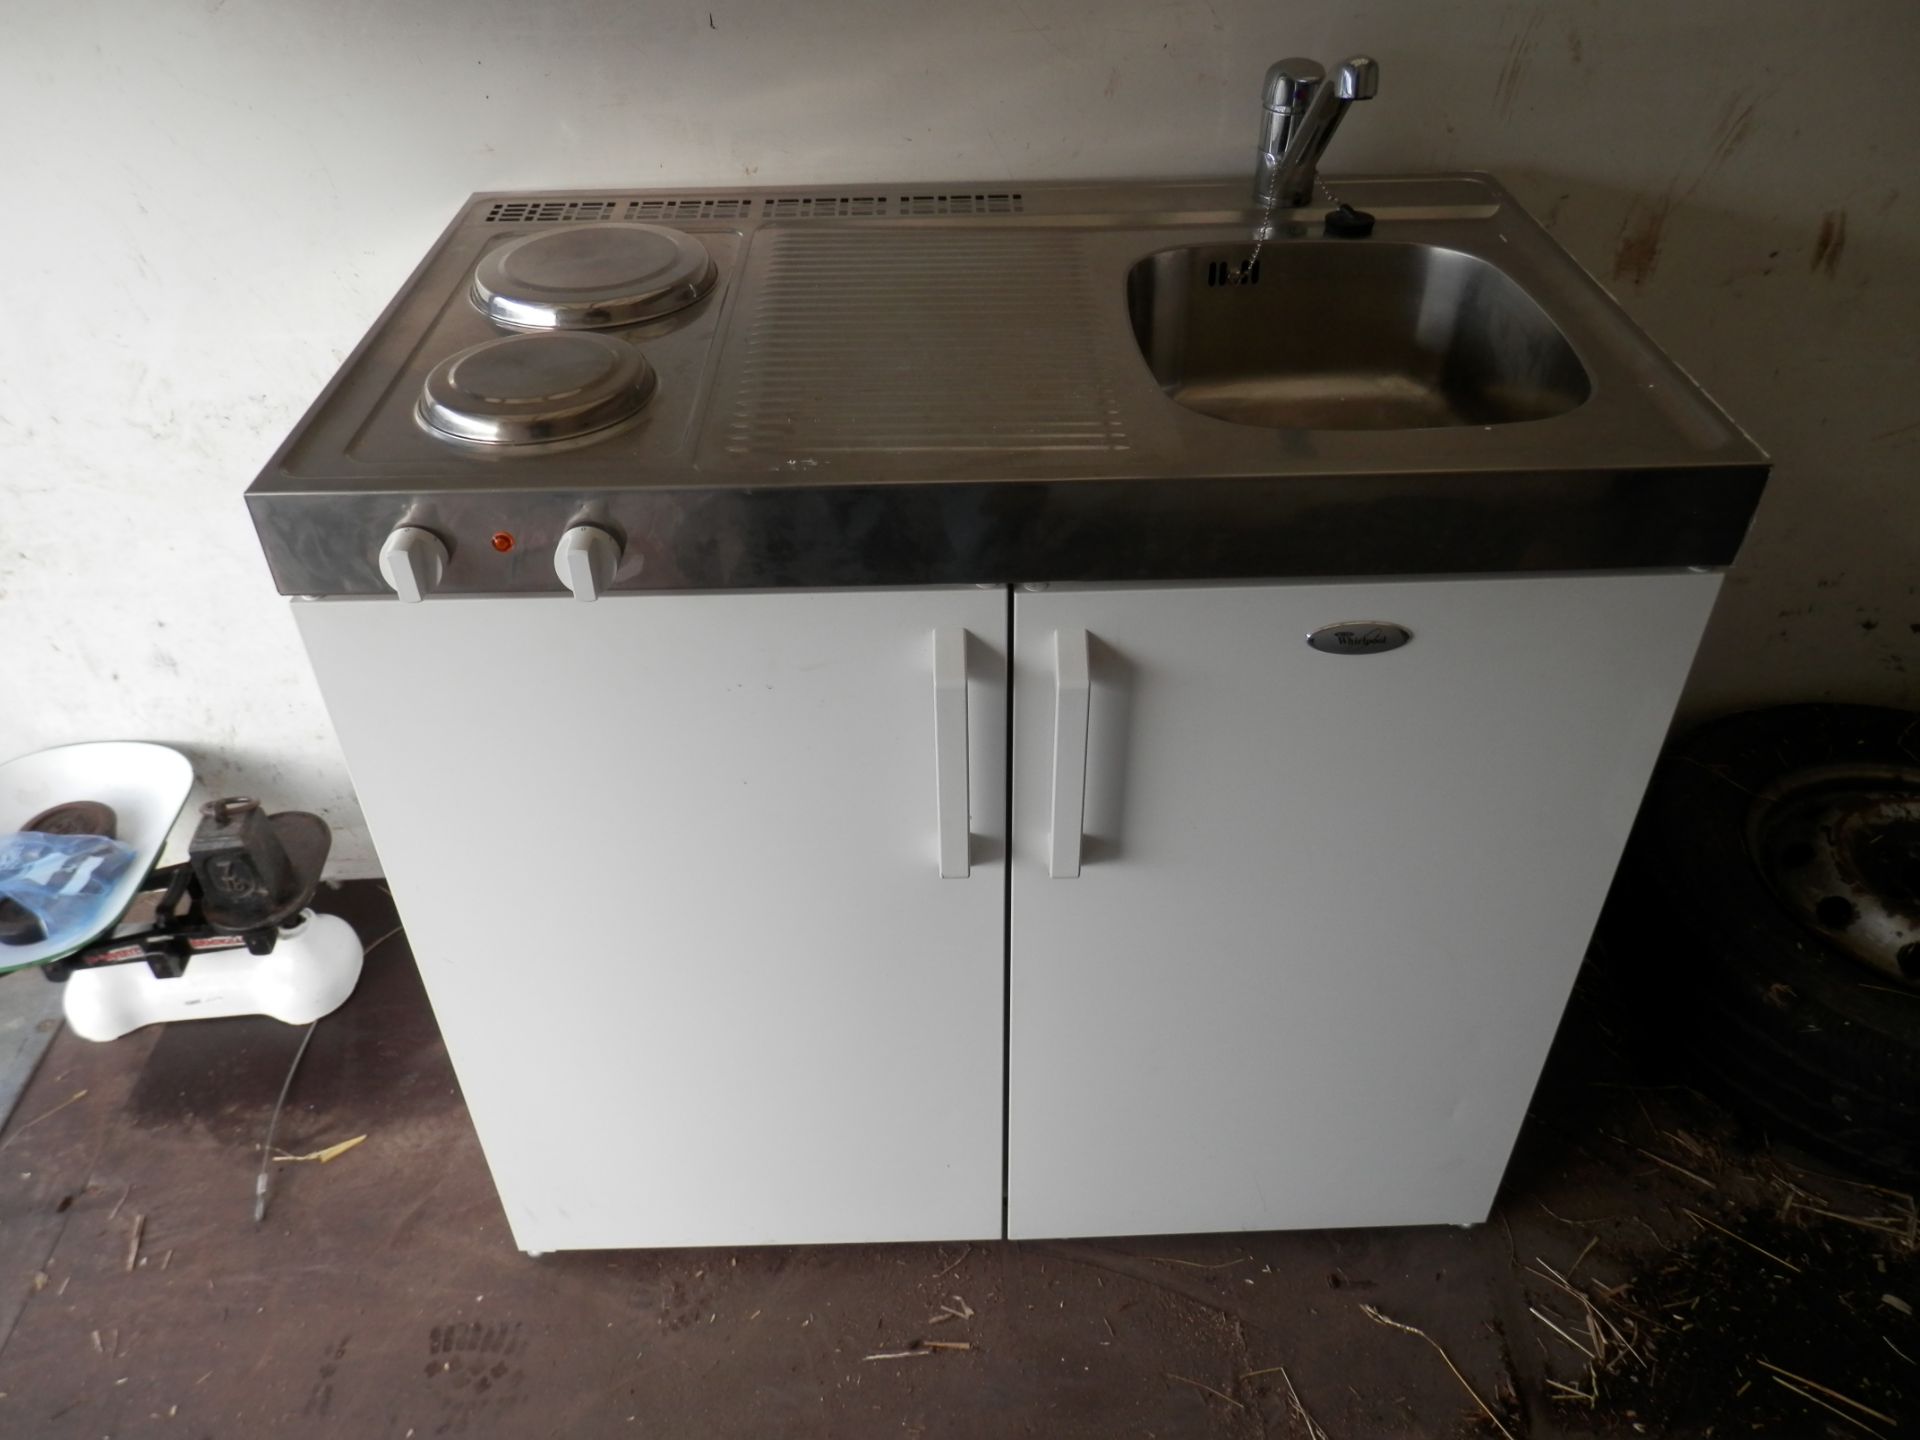 FREE STANDING WHIRLPOOL SINK, 2 HOBS & FRIDGE UNIT, IDEAL FOR MOTORHOME CONVERSION OR OFFICE ETC